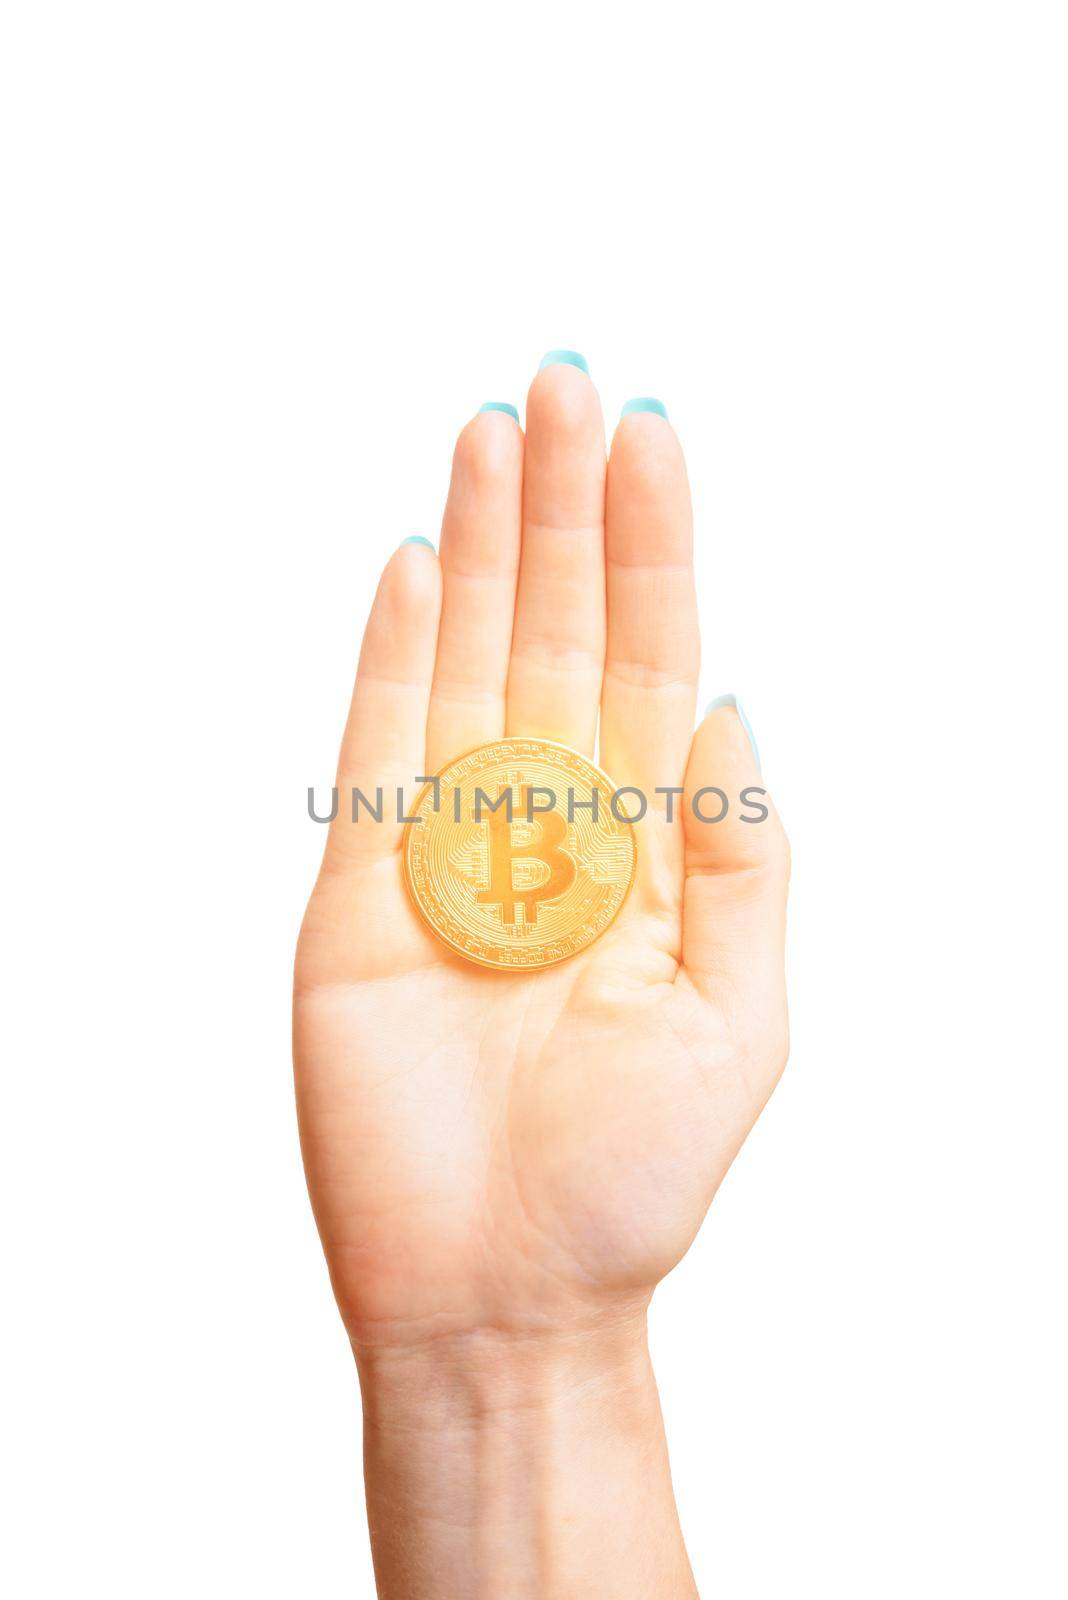 One glowing gold bitcoin on female palm hand on a white background, symbol of virtual money.